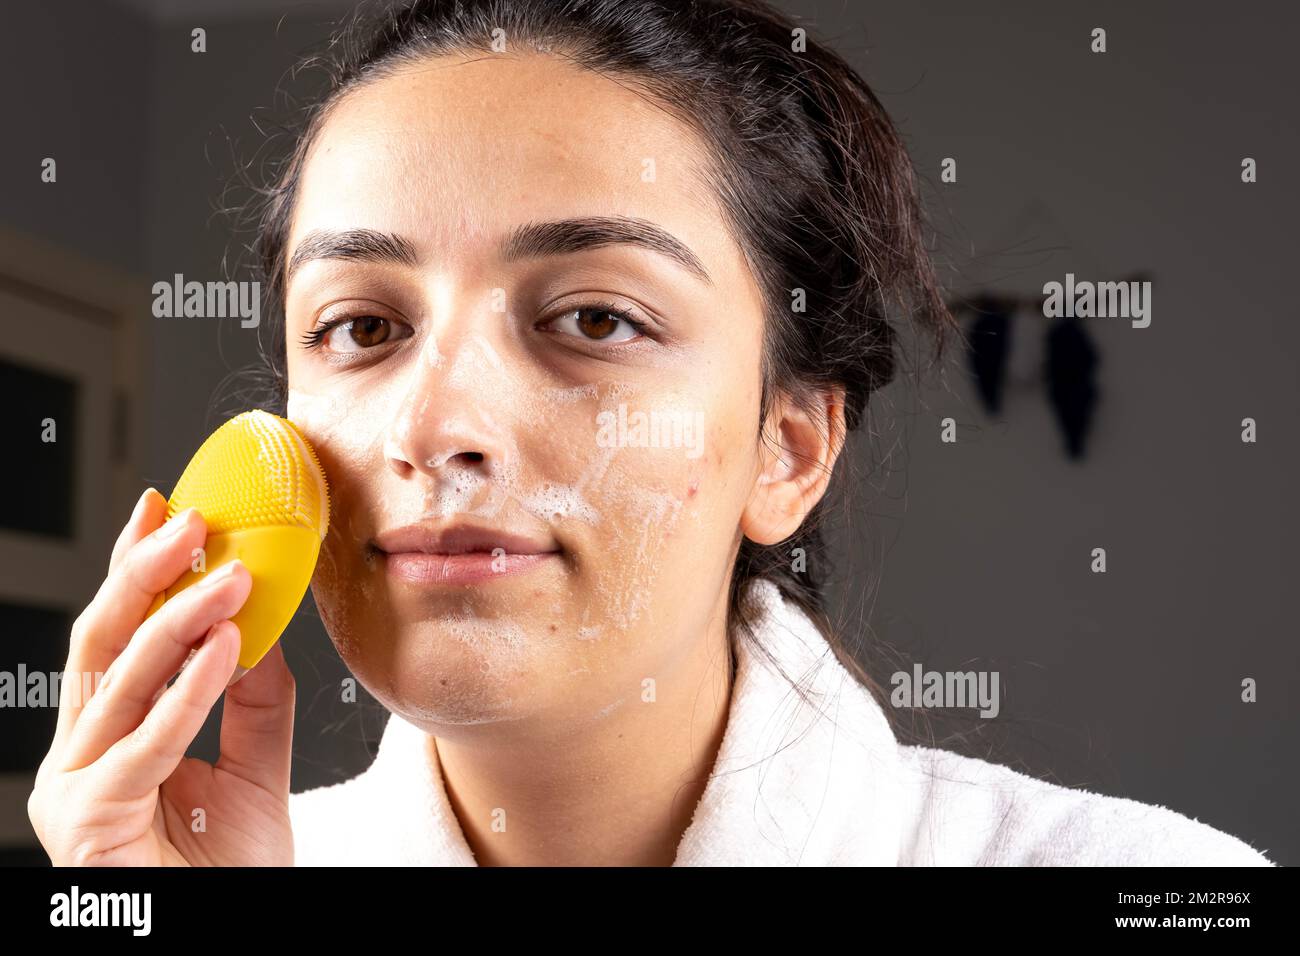 Millennial caucasian woman cleaning face skin with sponge and foam. Self skin care concept at home. Wearing bathrobe. Facial acne treatment idea. Stock Photo